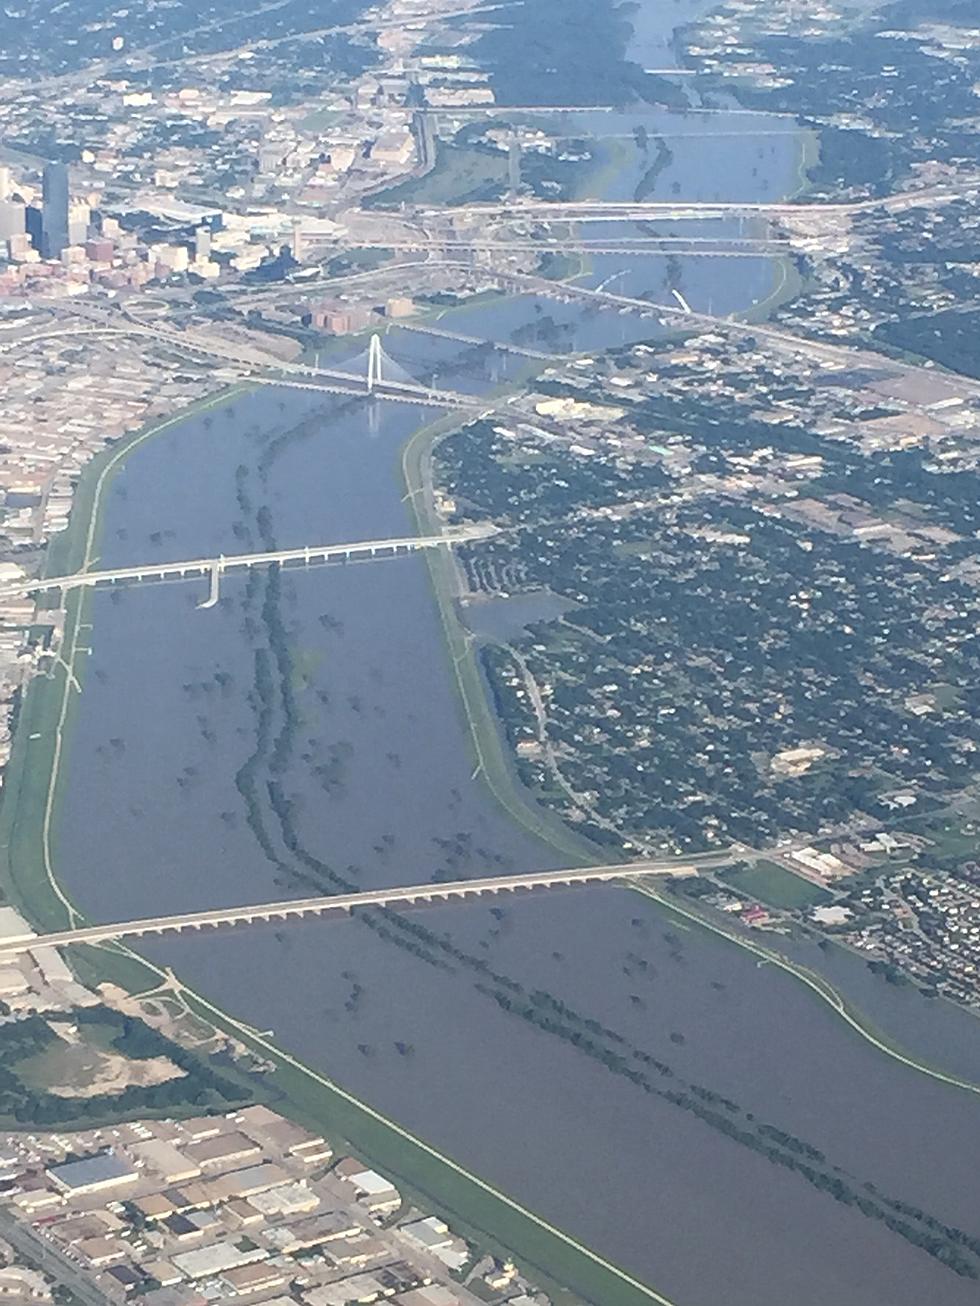 The Dallas/Fort Worth Flooding: A Bird’s Eye View [PICTURES]